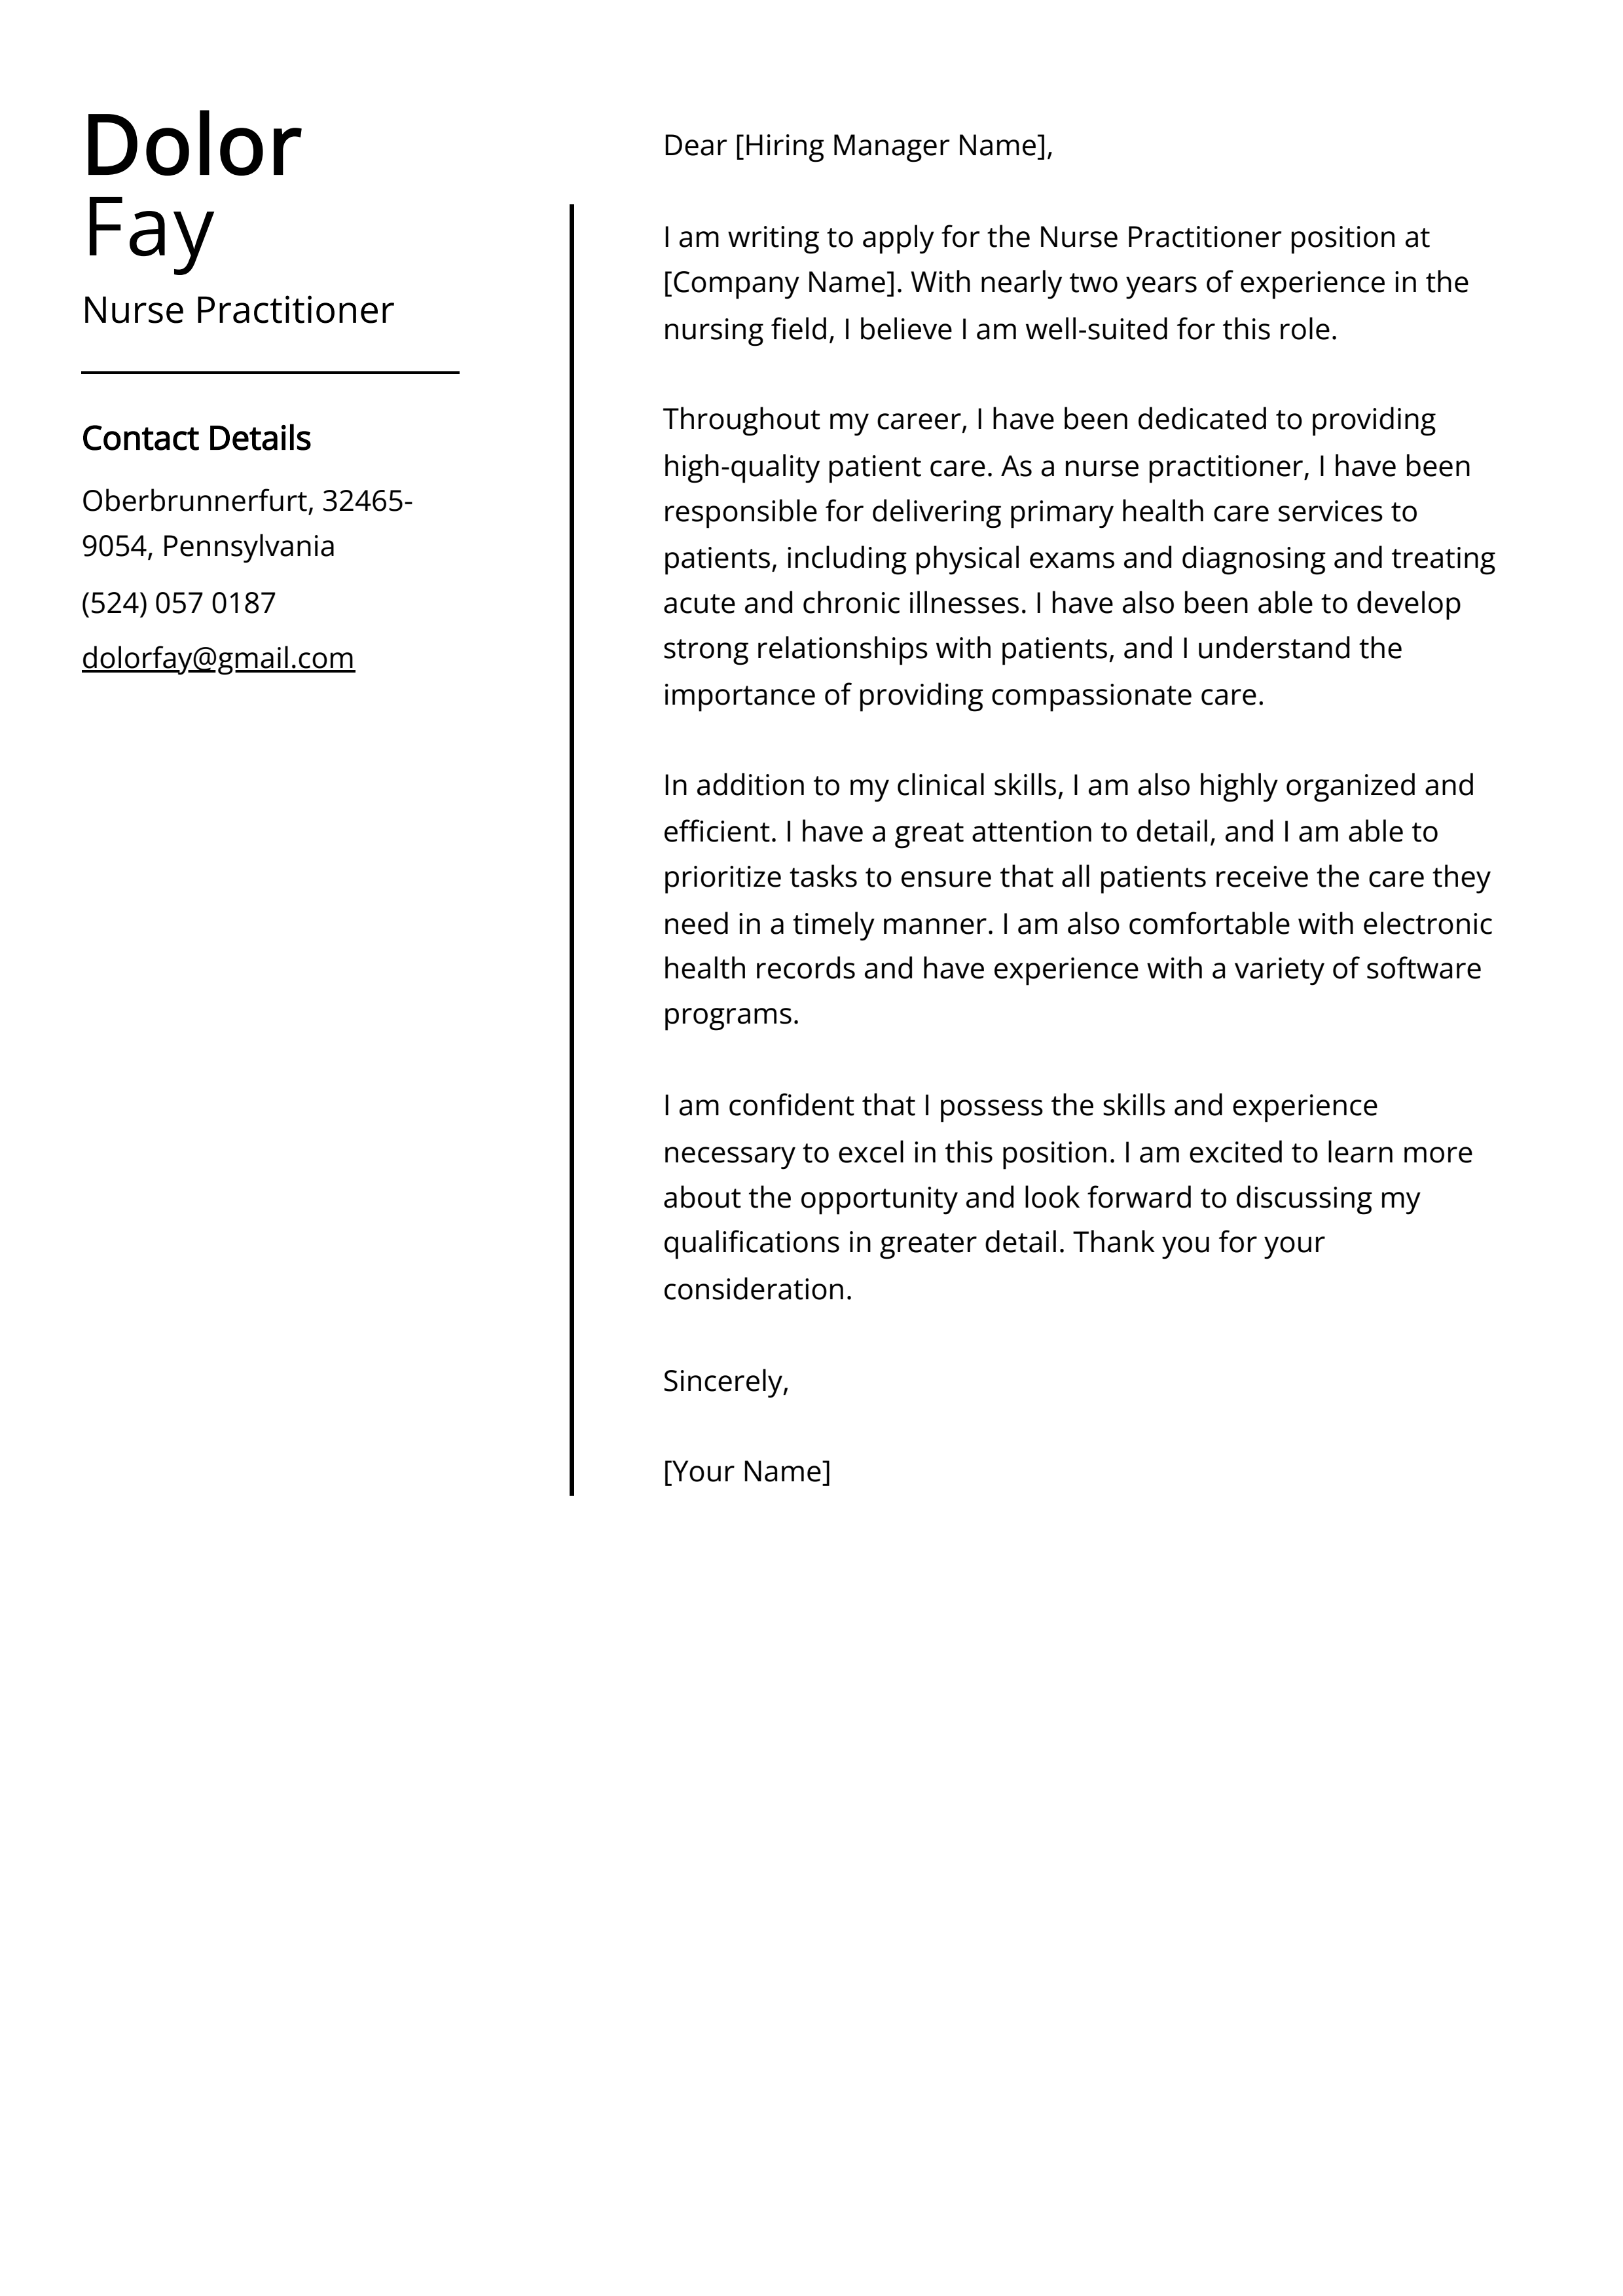 Nurse Practitioner Cover Letter Example